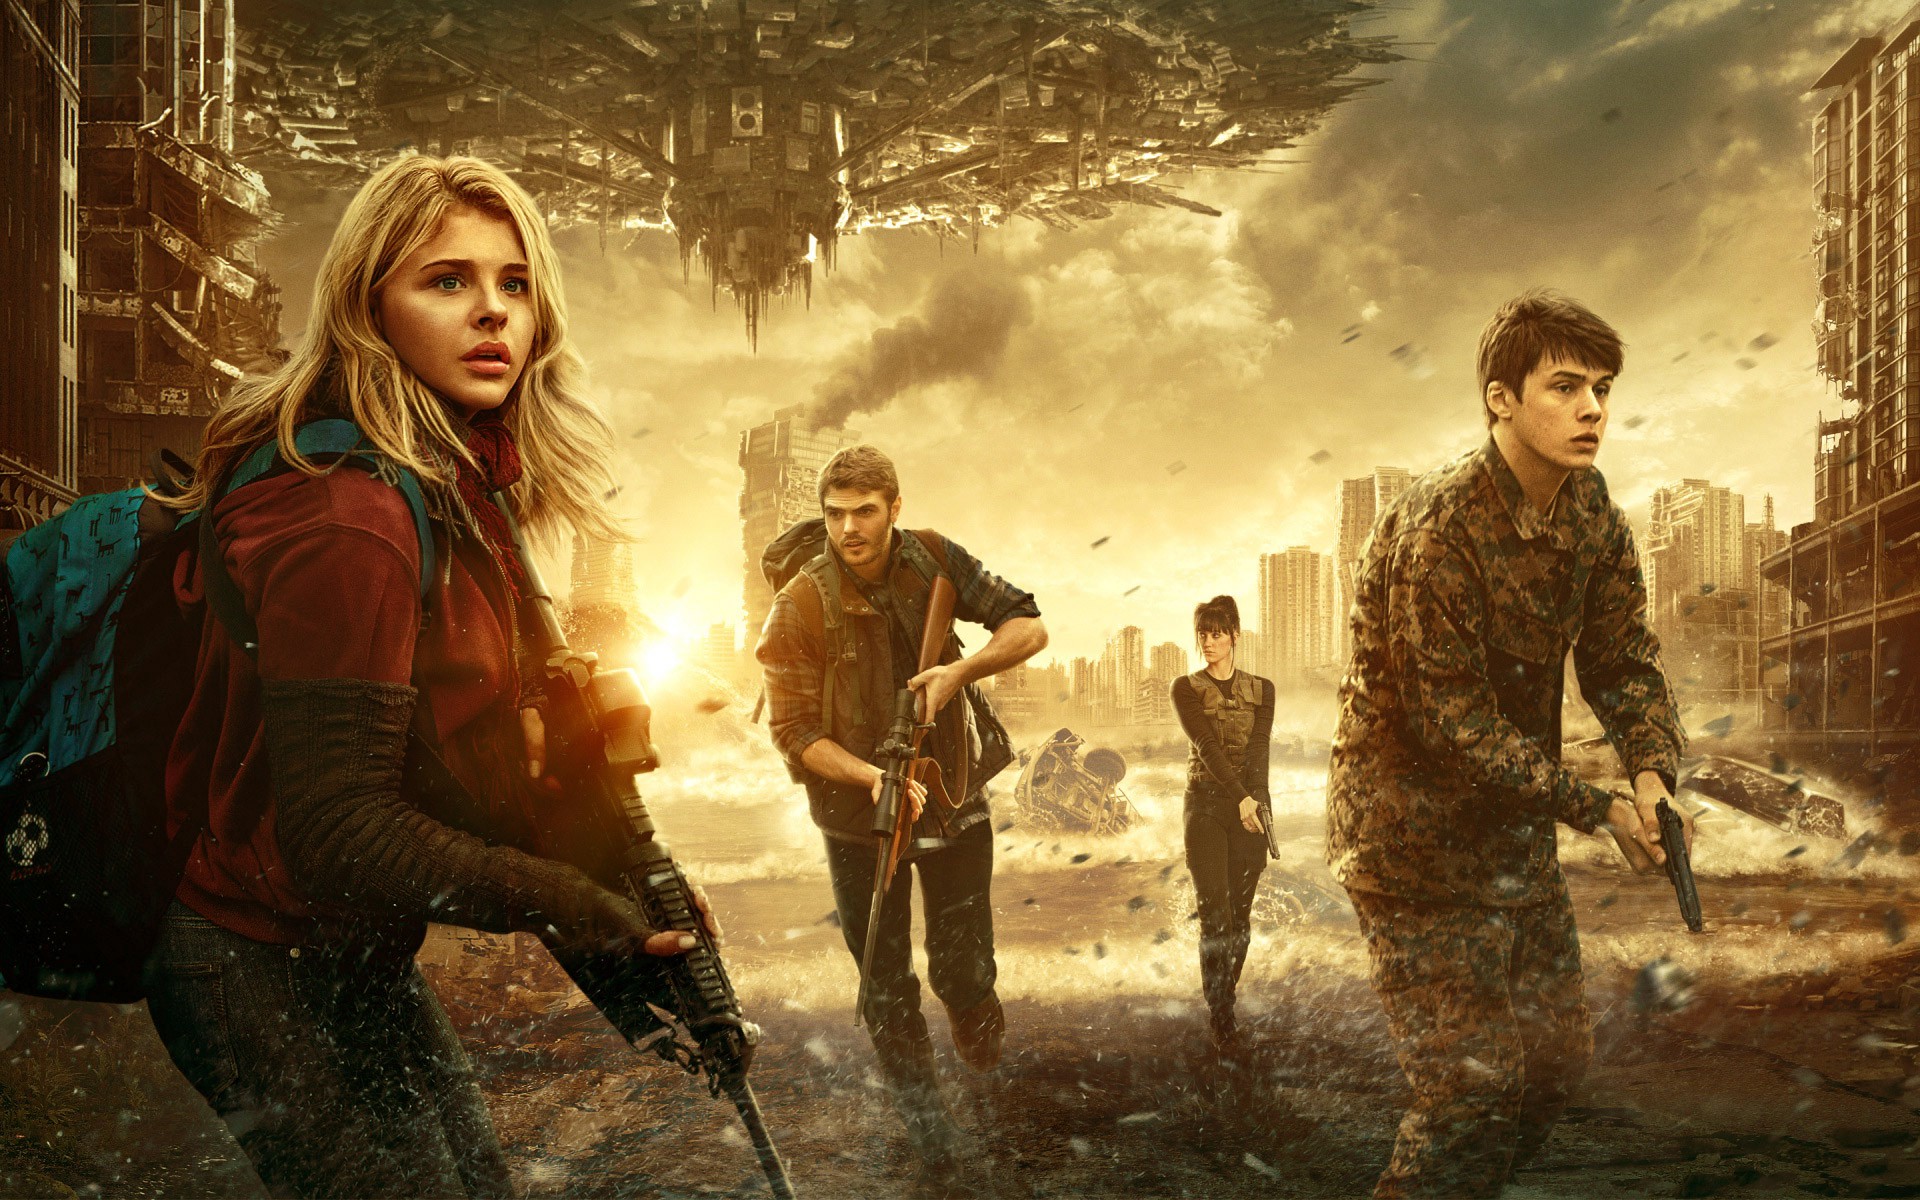 trailer for the 5th wave